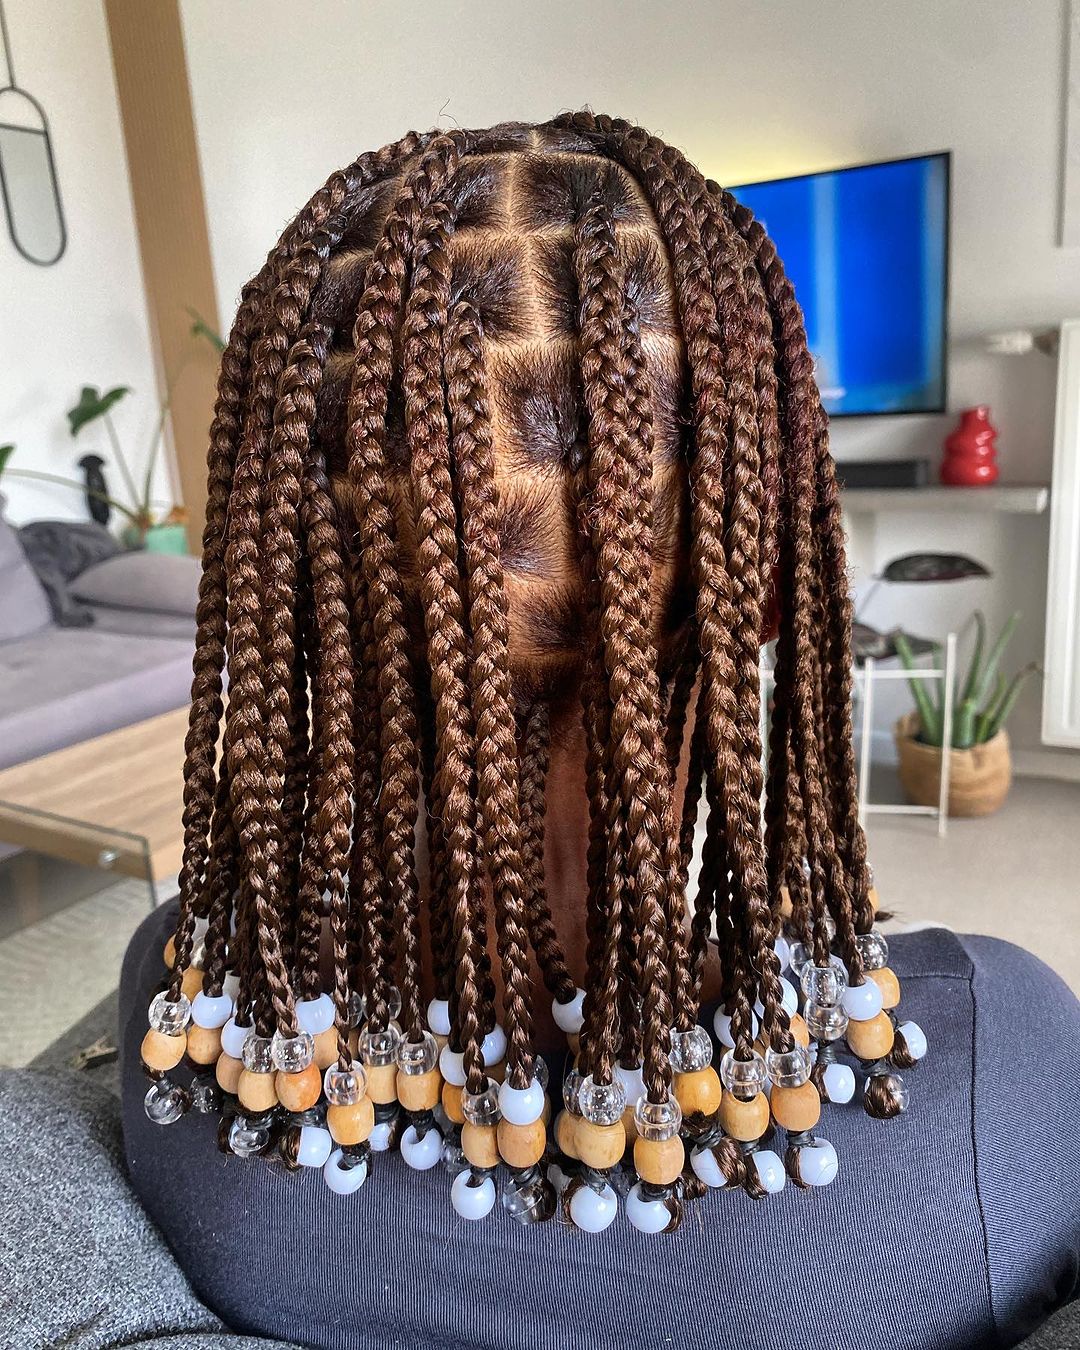 Shoulder Length Short Knotless Braids with Beads